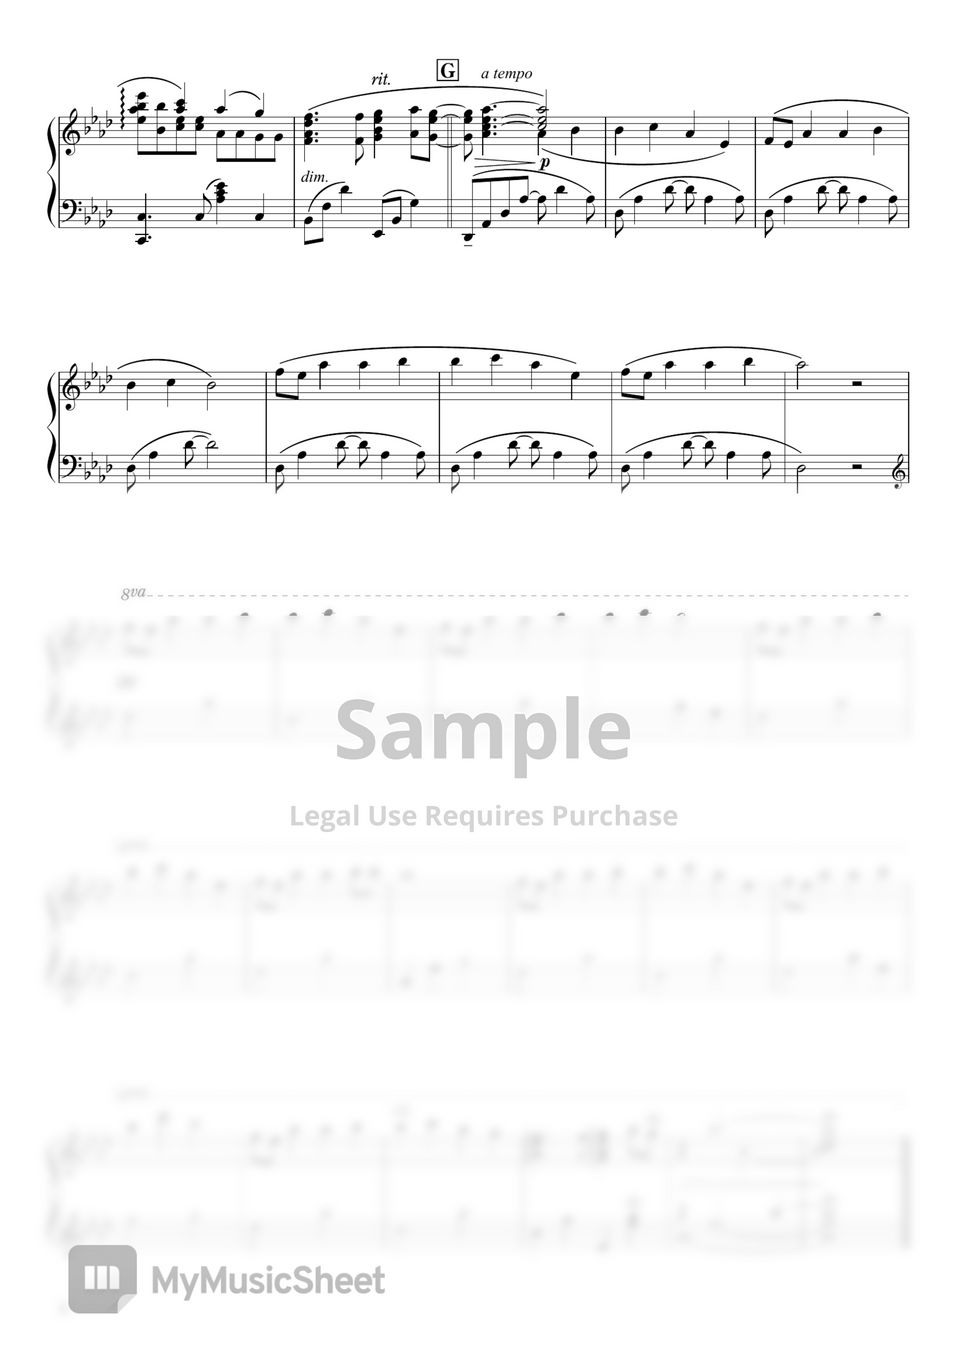 Onaji Takami e (To the Same Heights)-Clannad OST Numbered Musical Notation  Preview